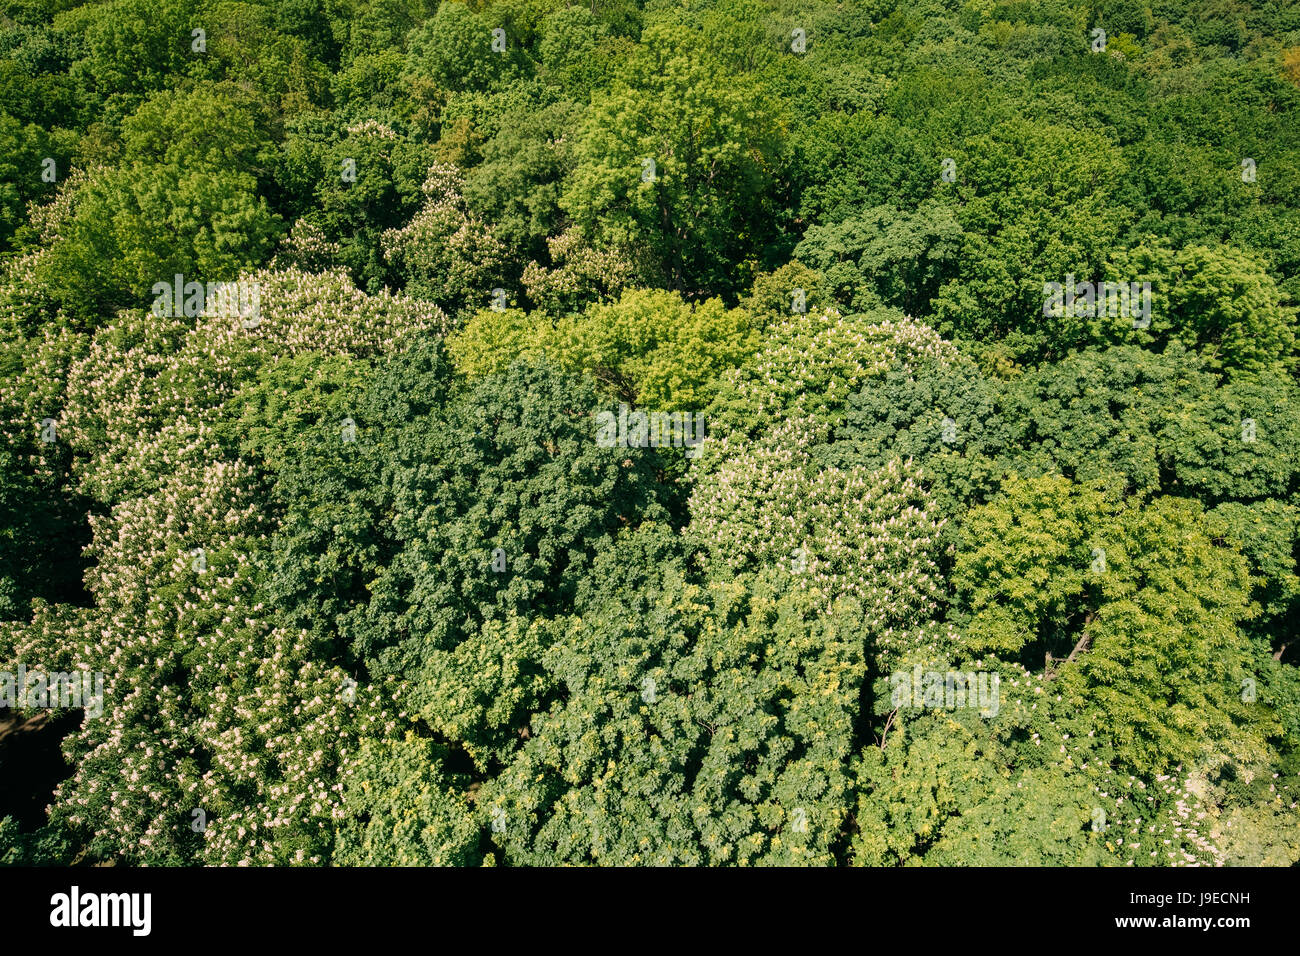 Green Natural Background Of Deciduous Forest. Top View Aerial View Landscape Of Green Crowns Trees Woods At Spring Or Summer Season Stock Photo